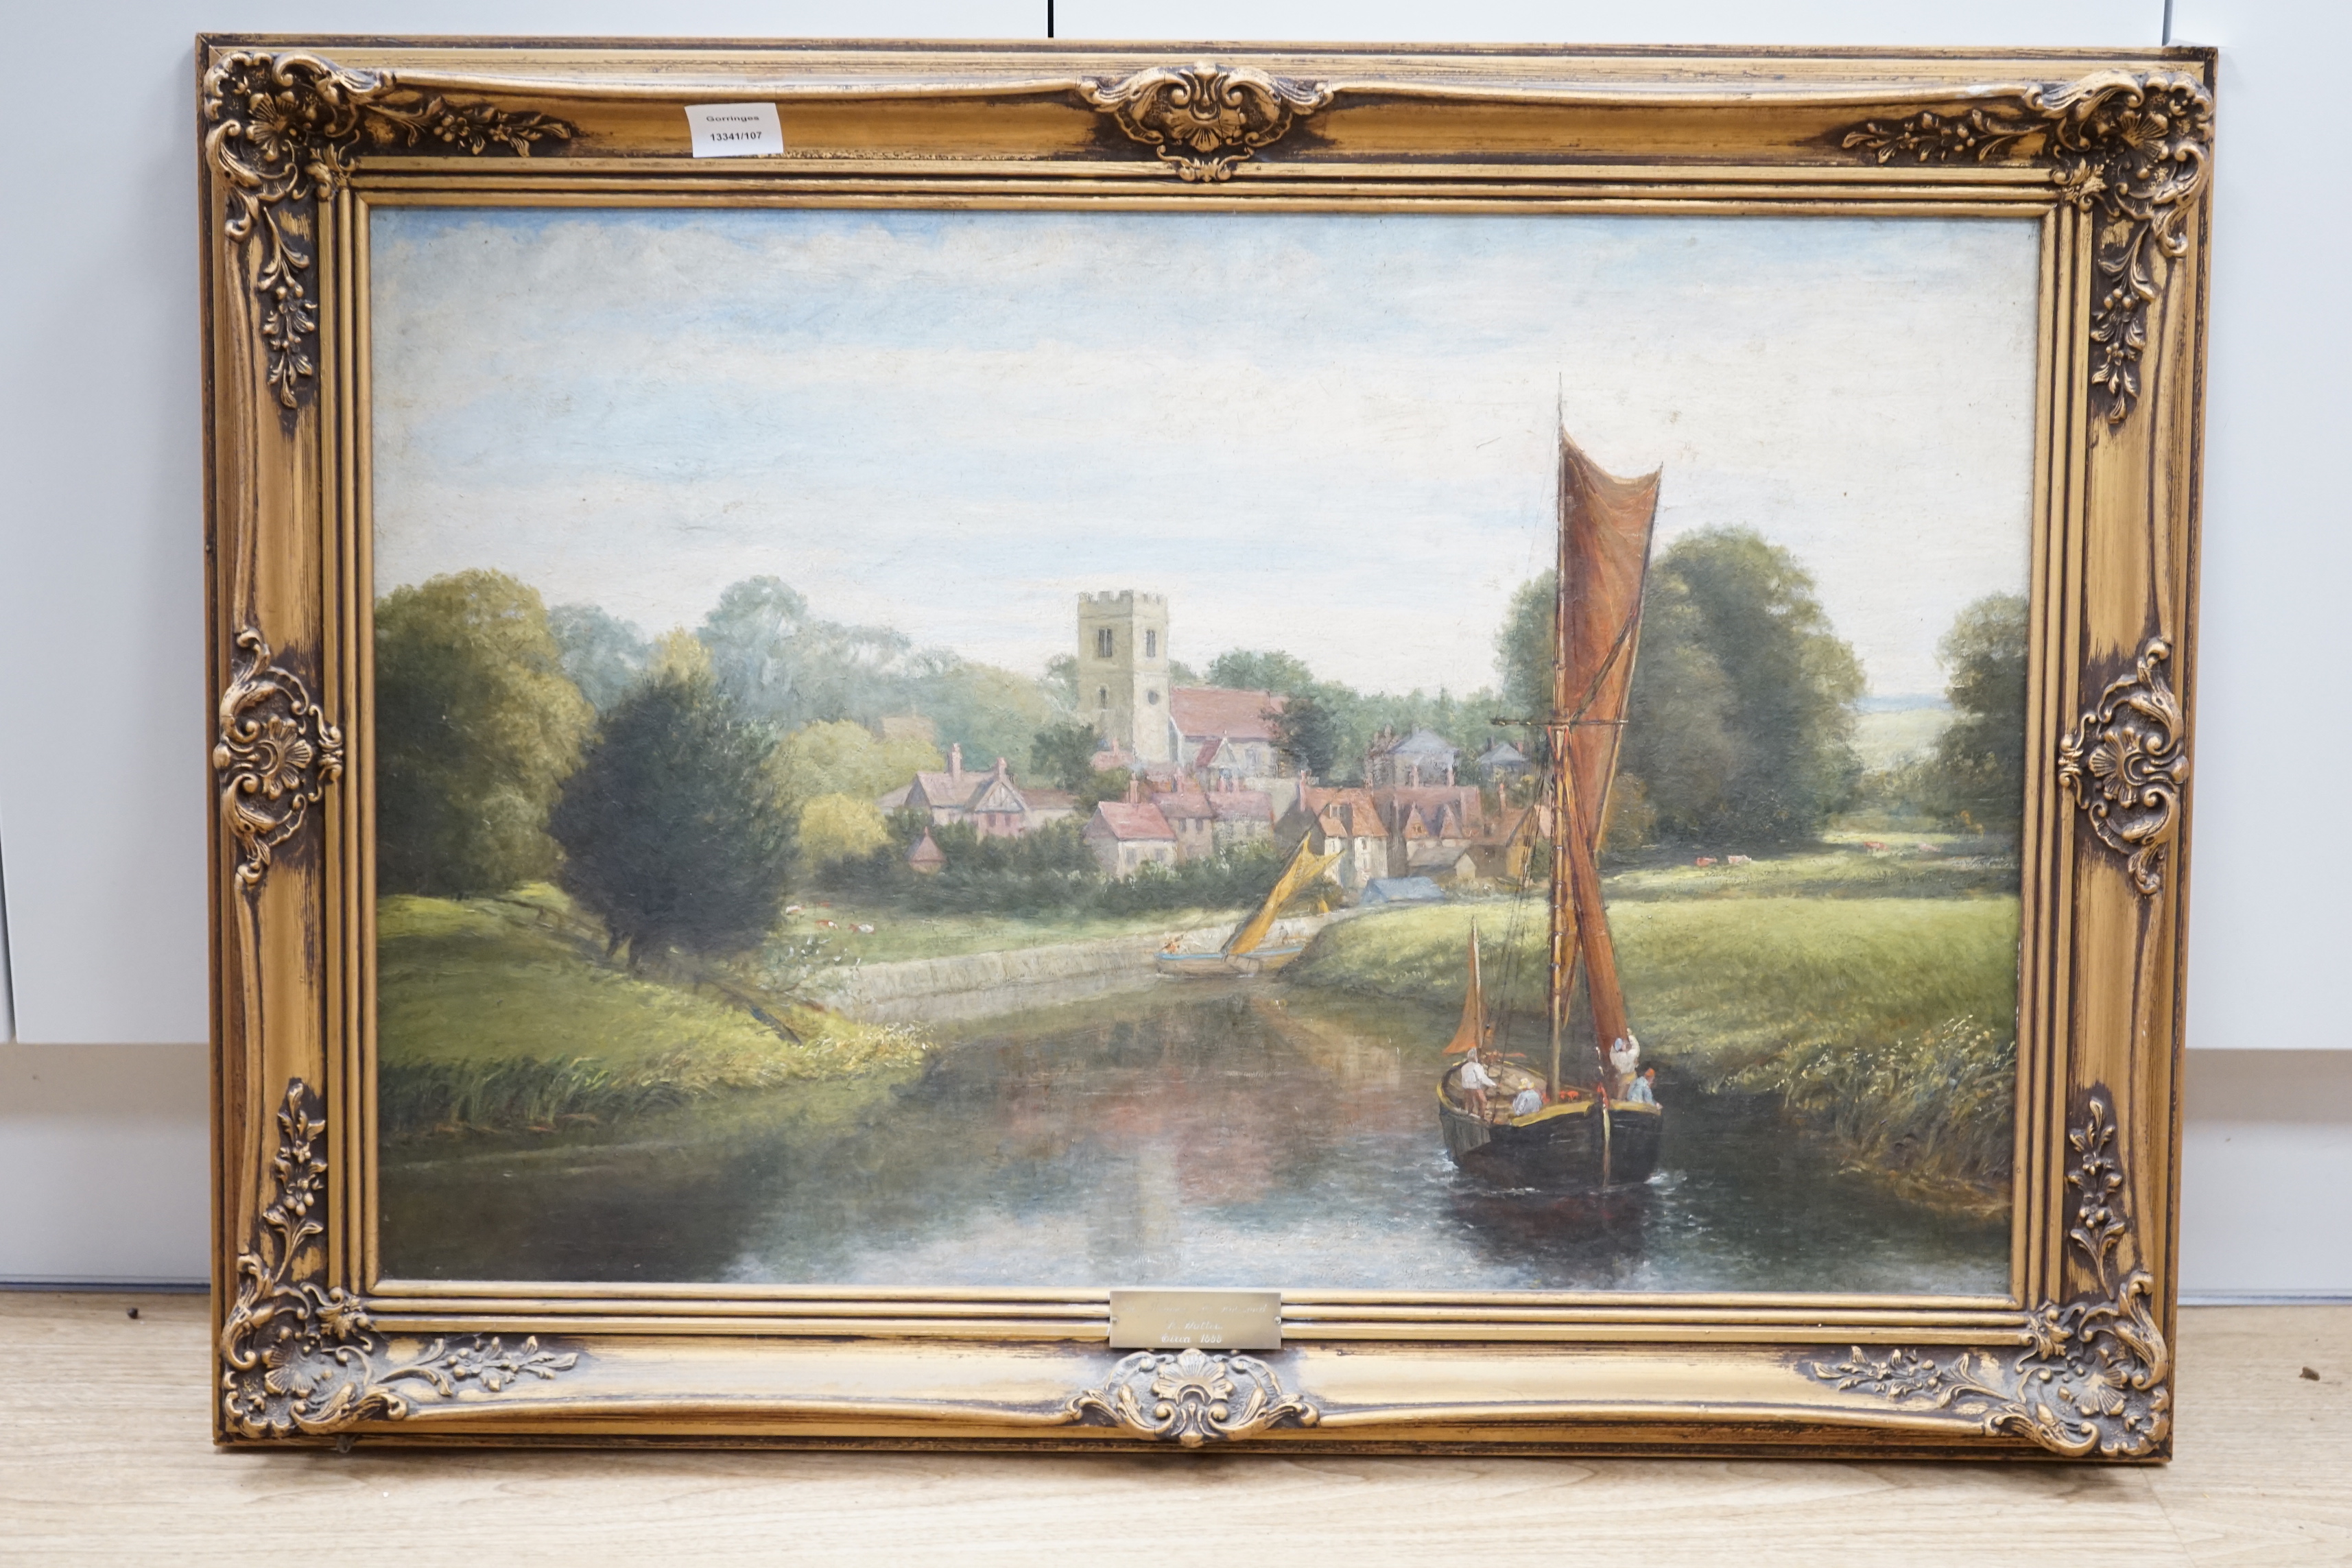 L. Walters, oil on canvas, The Medway at Aylesford, unsigned, applied plaque to the frame, 49 x - Image 2 of 3